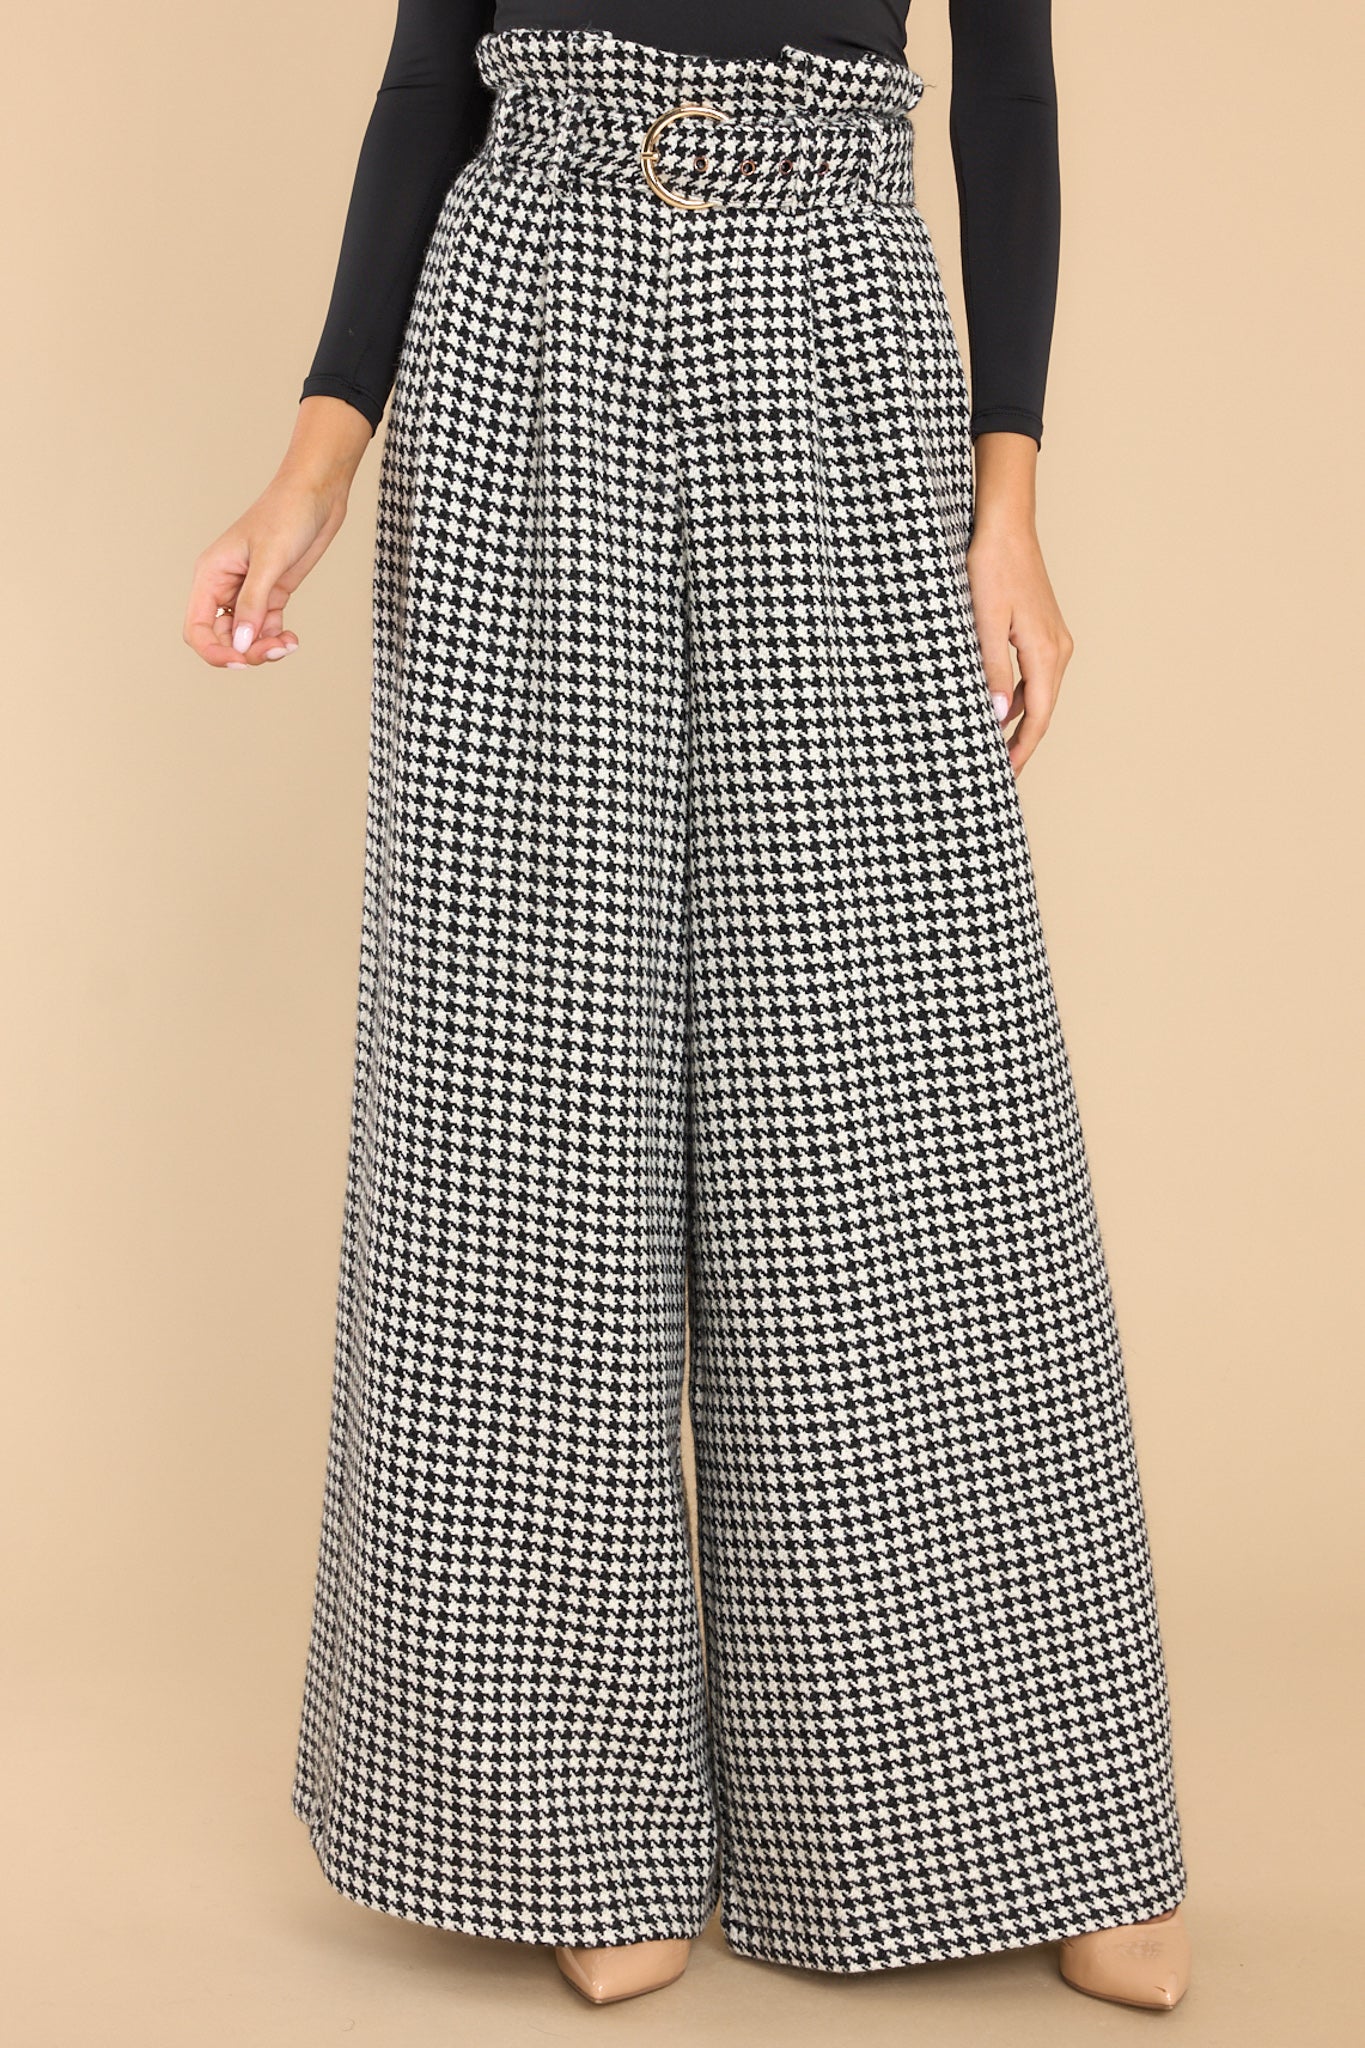 Counting Every Minute Black Houndstooth Pants - Red Dress